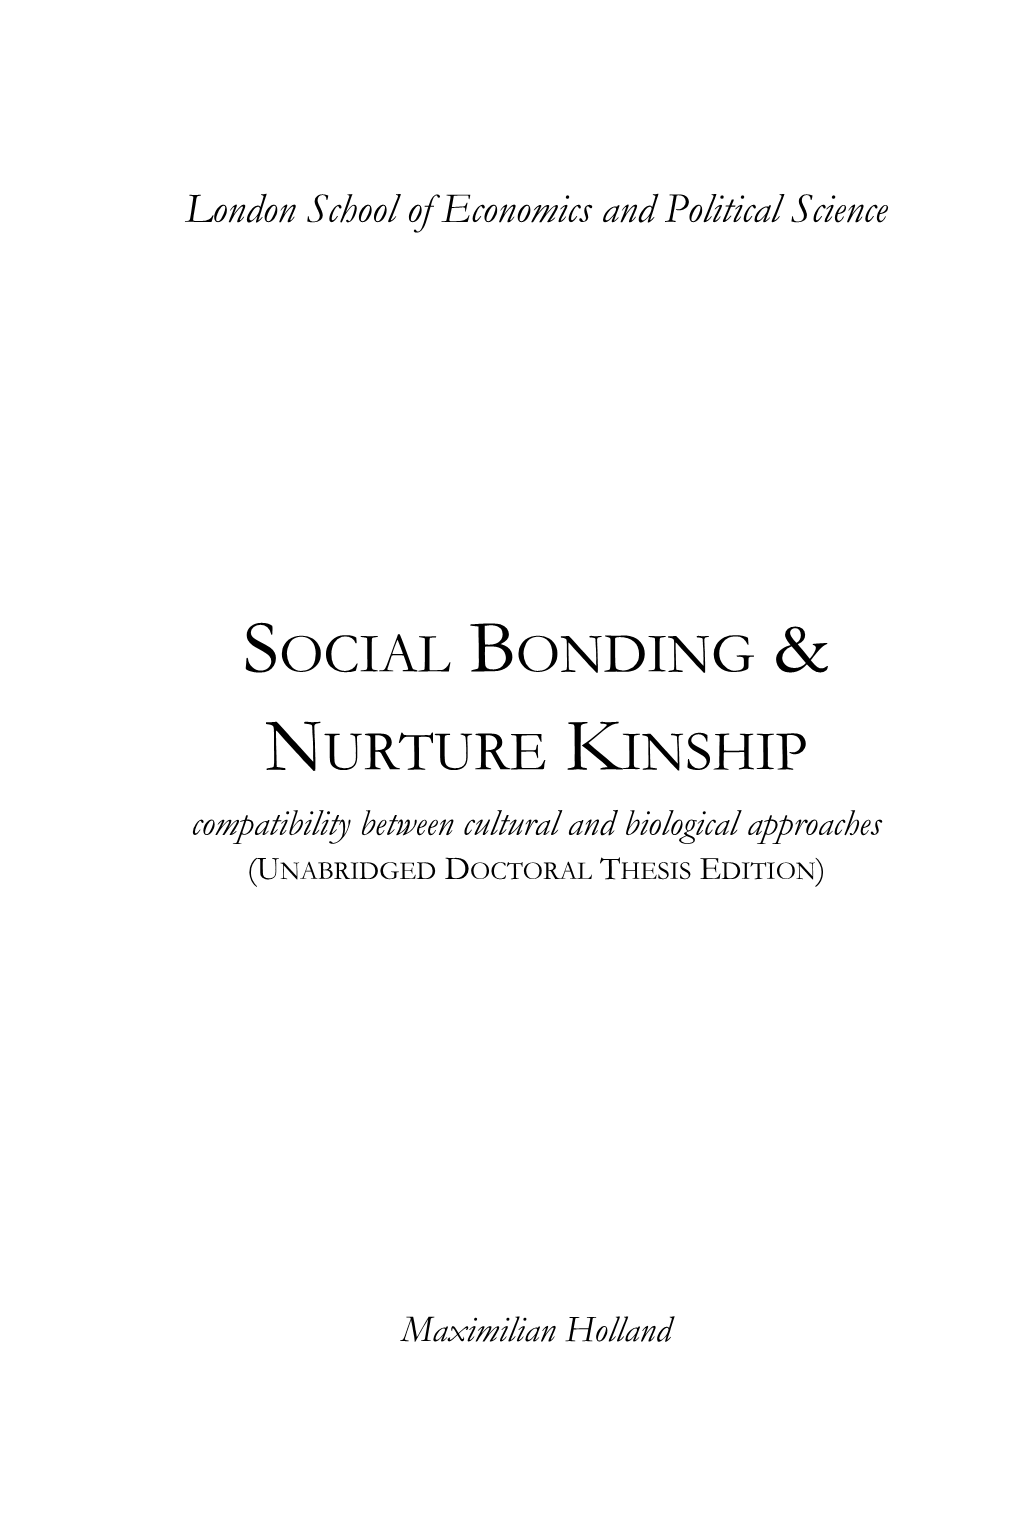 Social Bonding and Nurture Kinship: Compatibility Between Cultural and Biological Approaches / Maximilian P